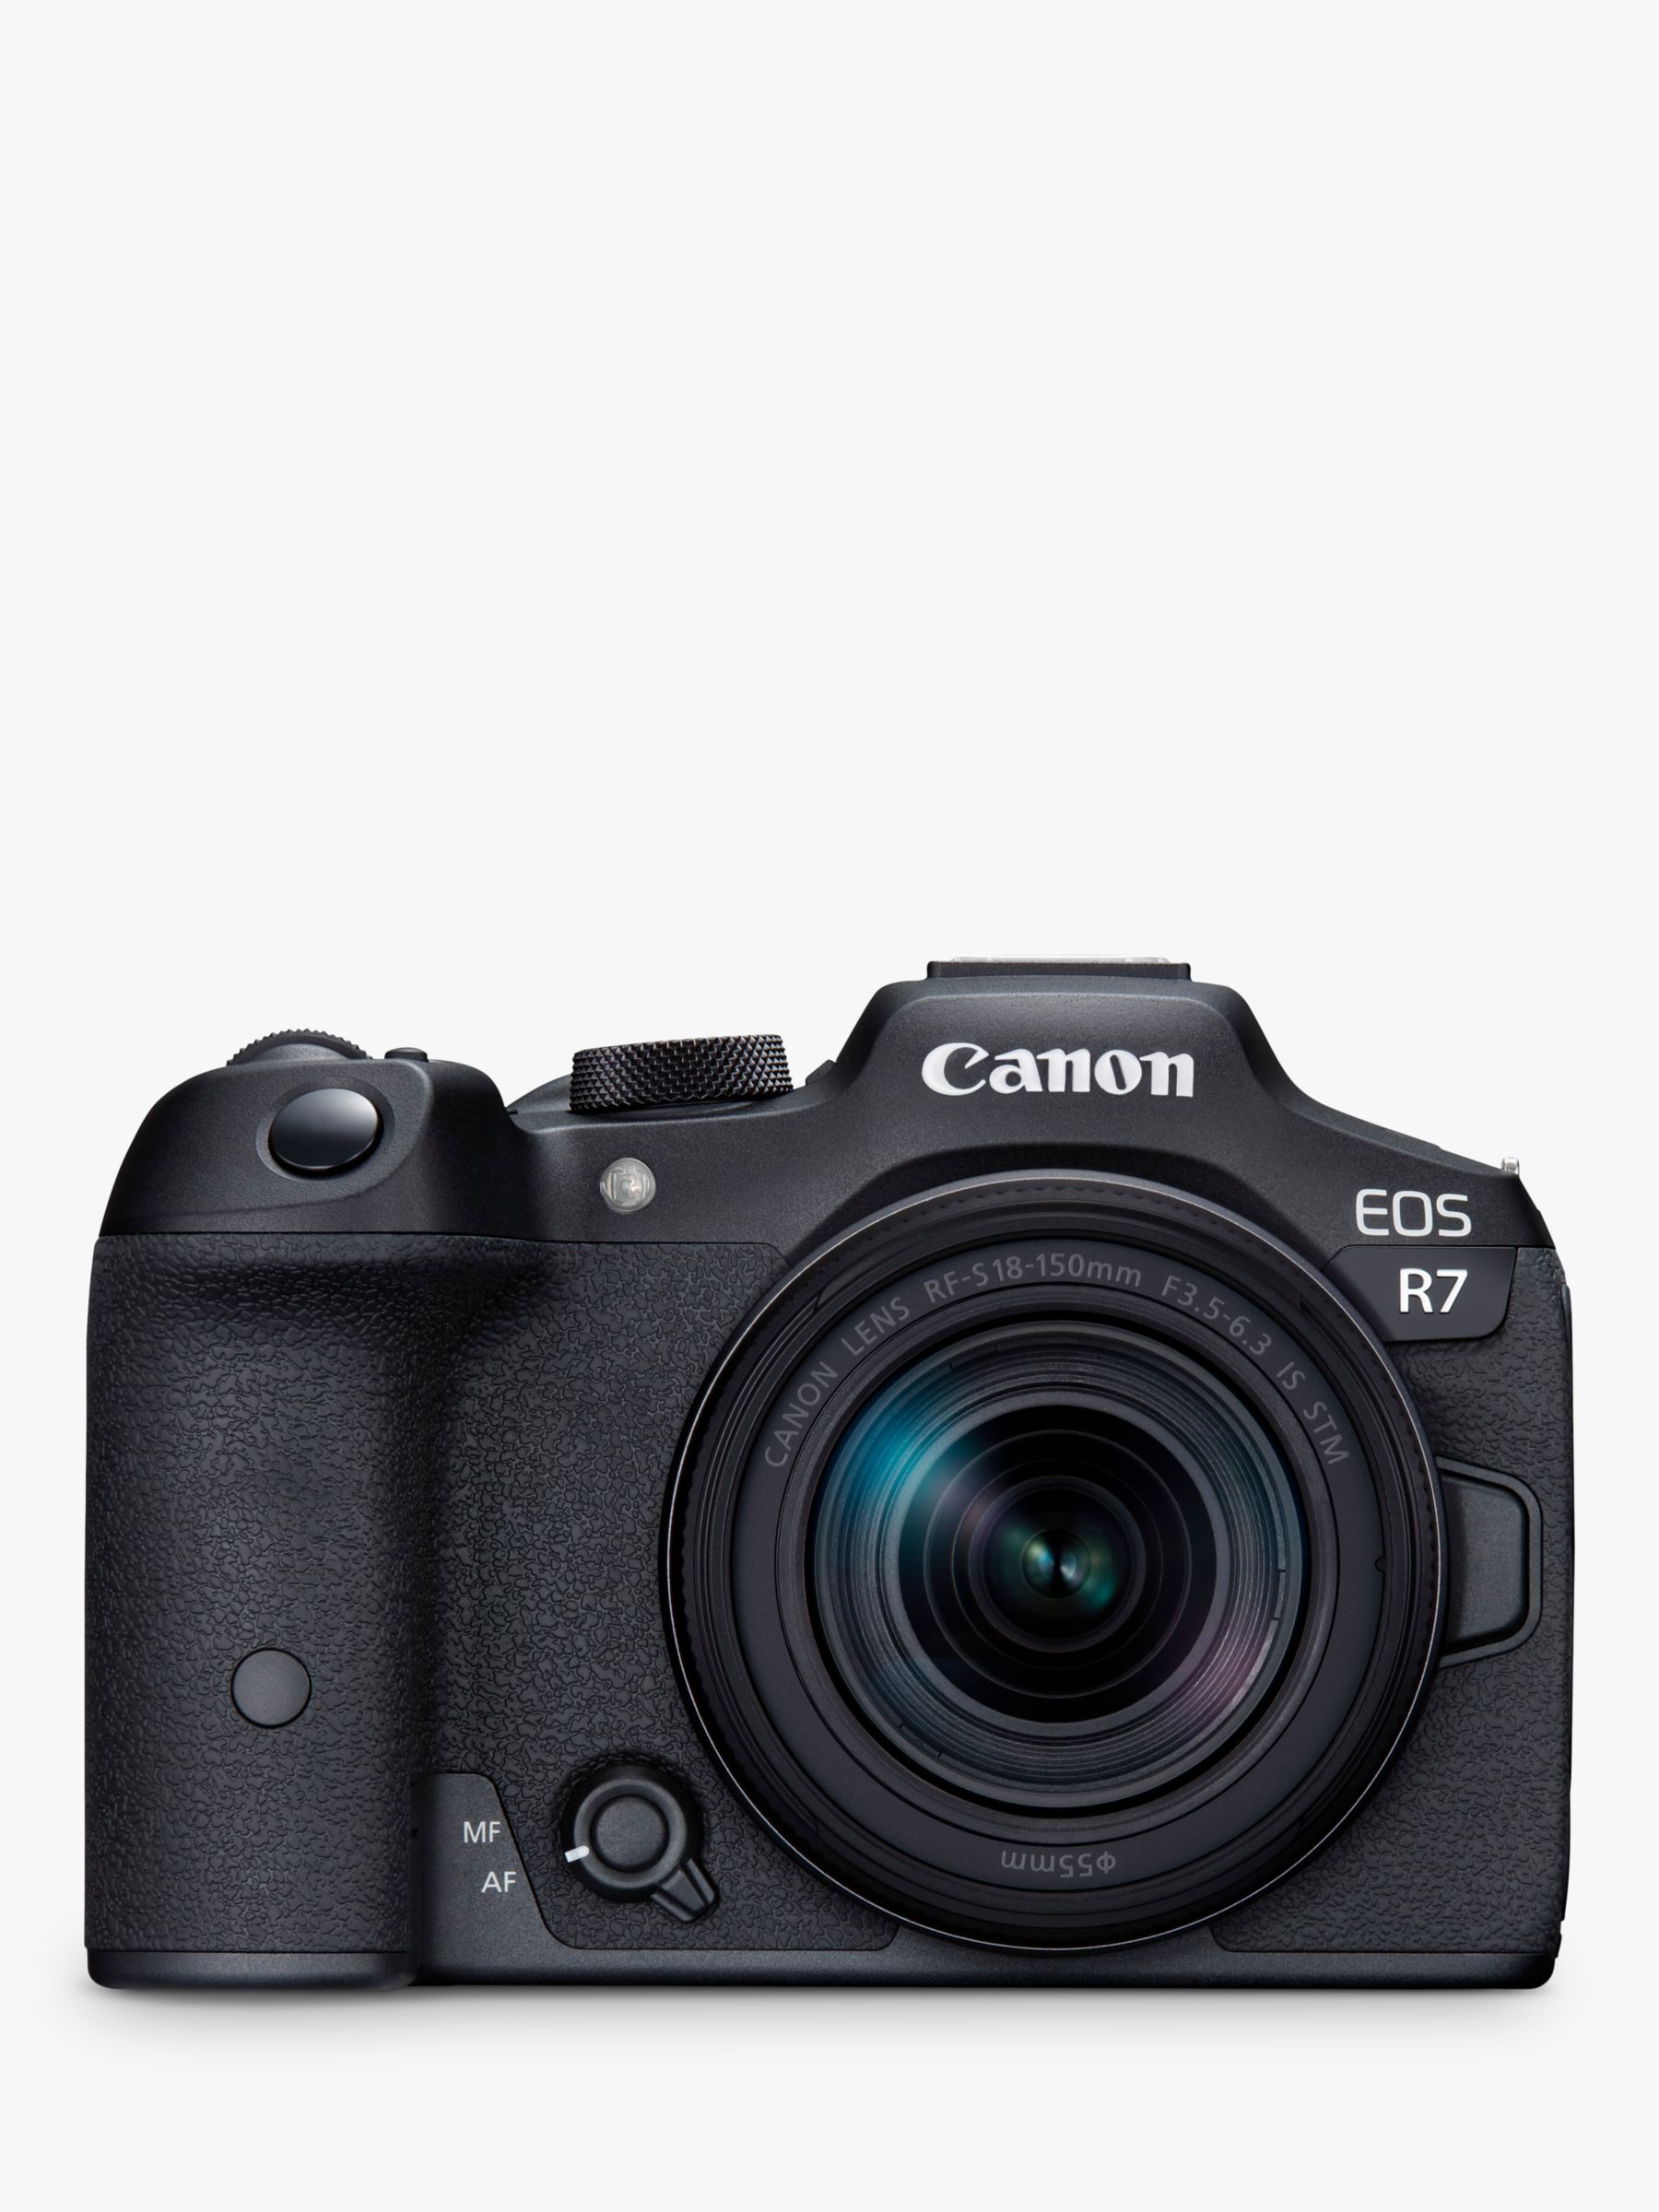 Canon EOS R7 Compact System Camera with RF-S 18-150mm Zoom Lens, 4K Ultra HD, 32.5MP, Wi-Fi, Bluetooth, OLED EVF, 3" Vari-Angle Touch Screen